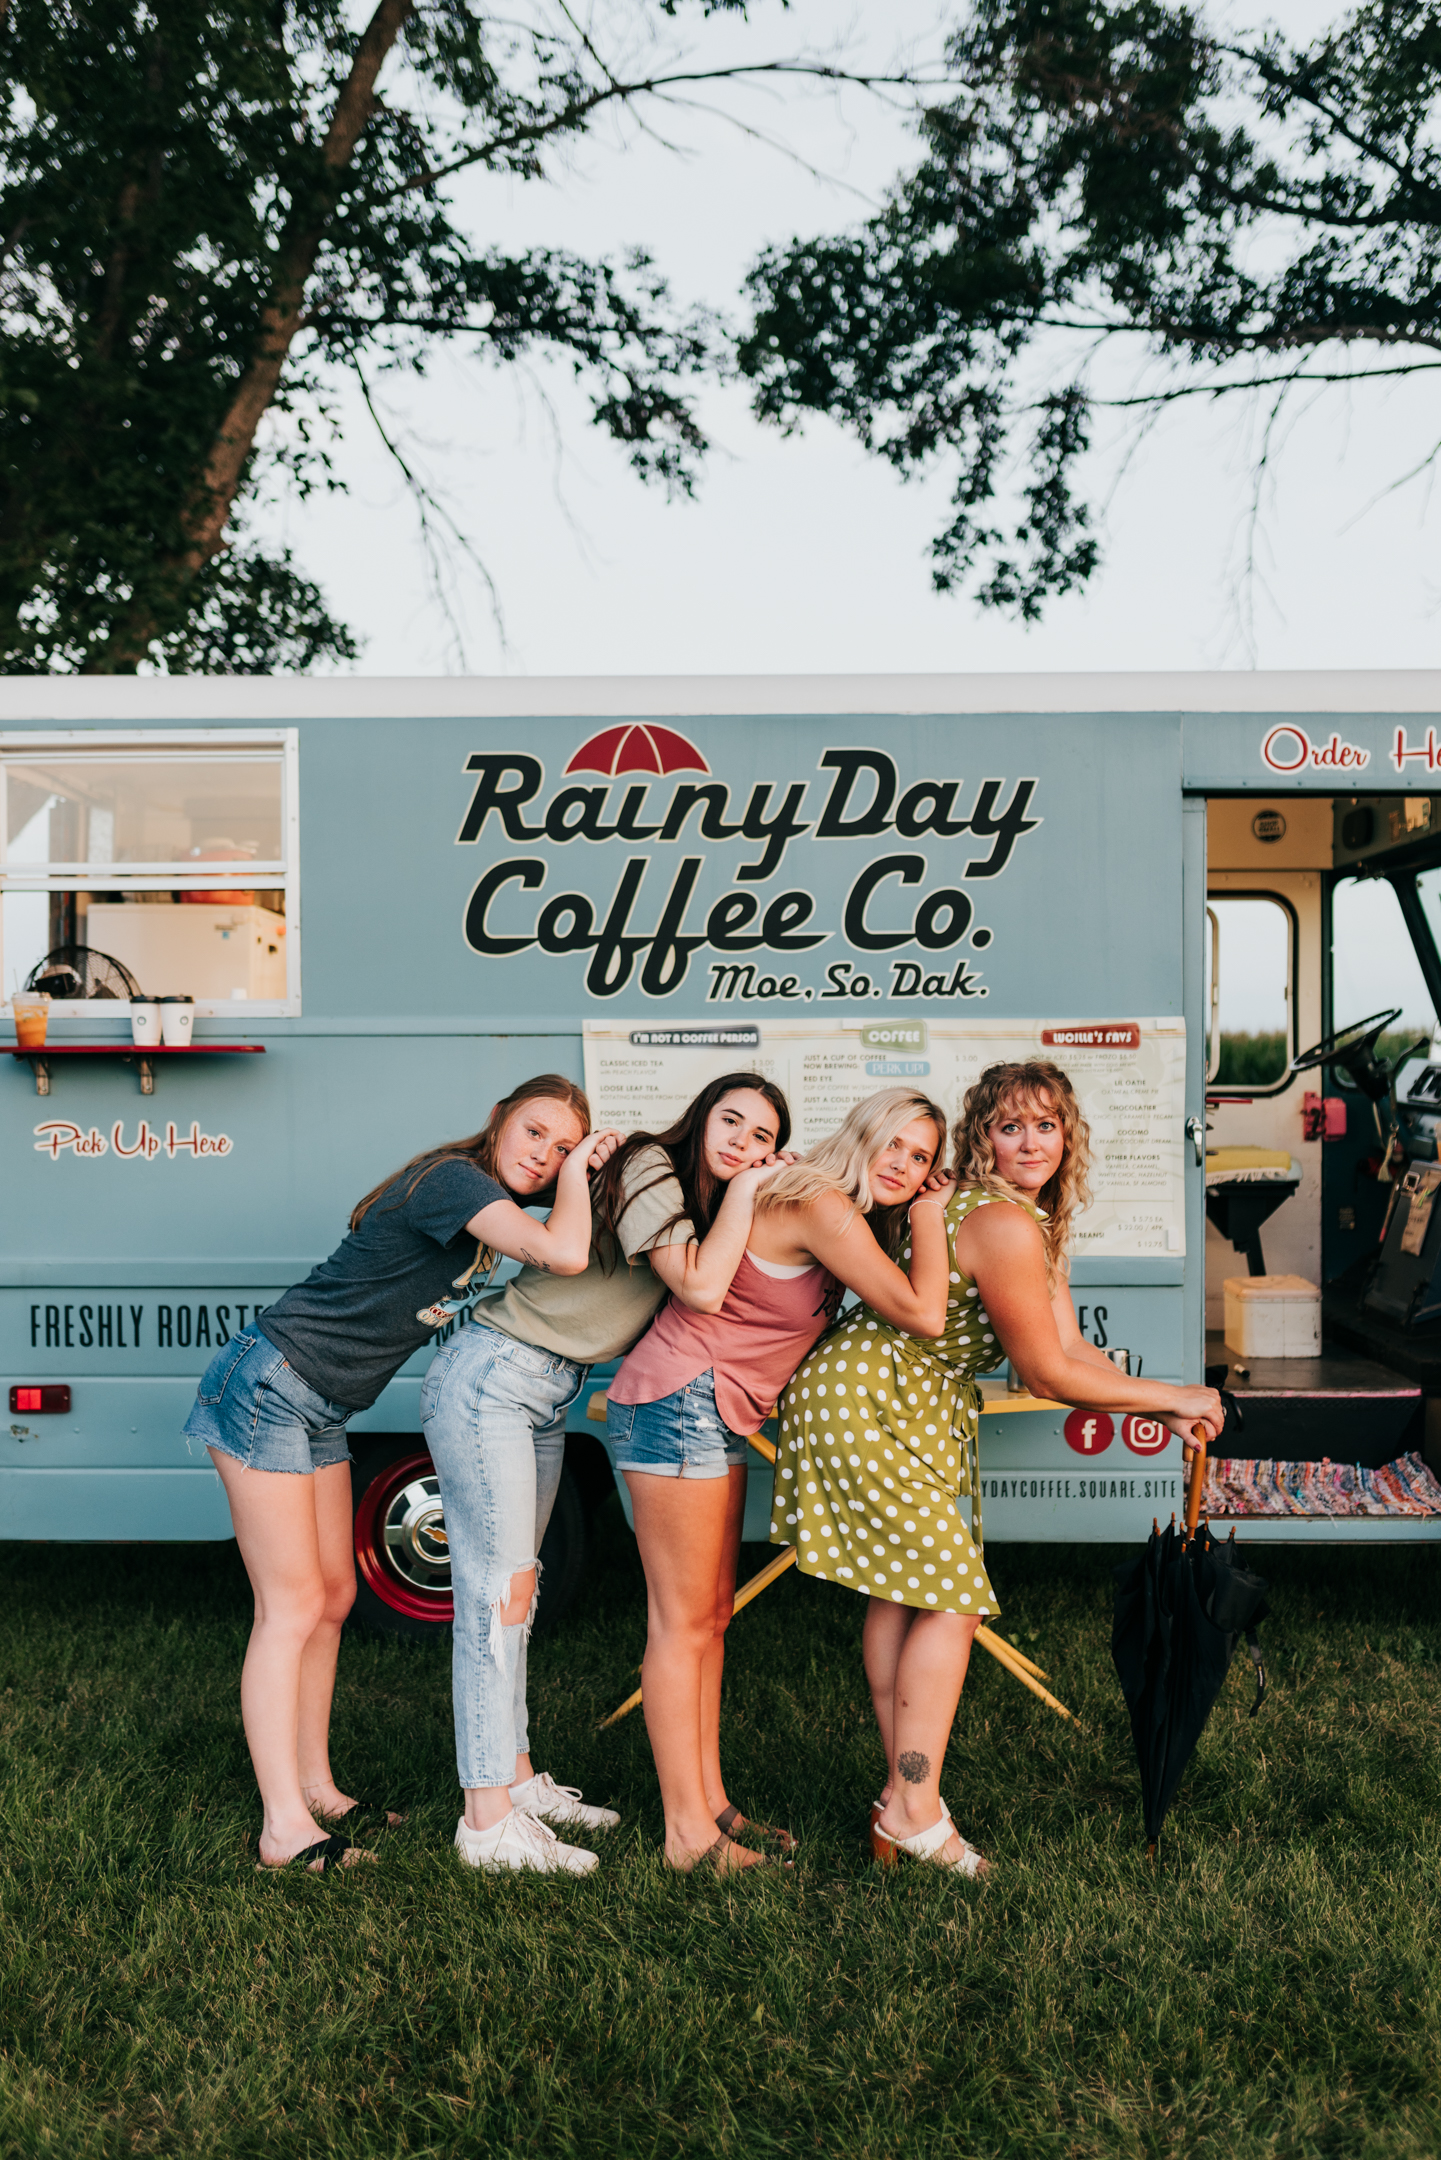 Group of women pose in front of coffee truck.